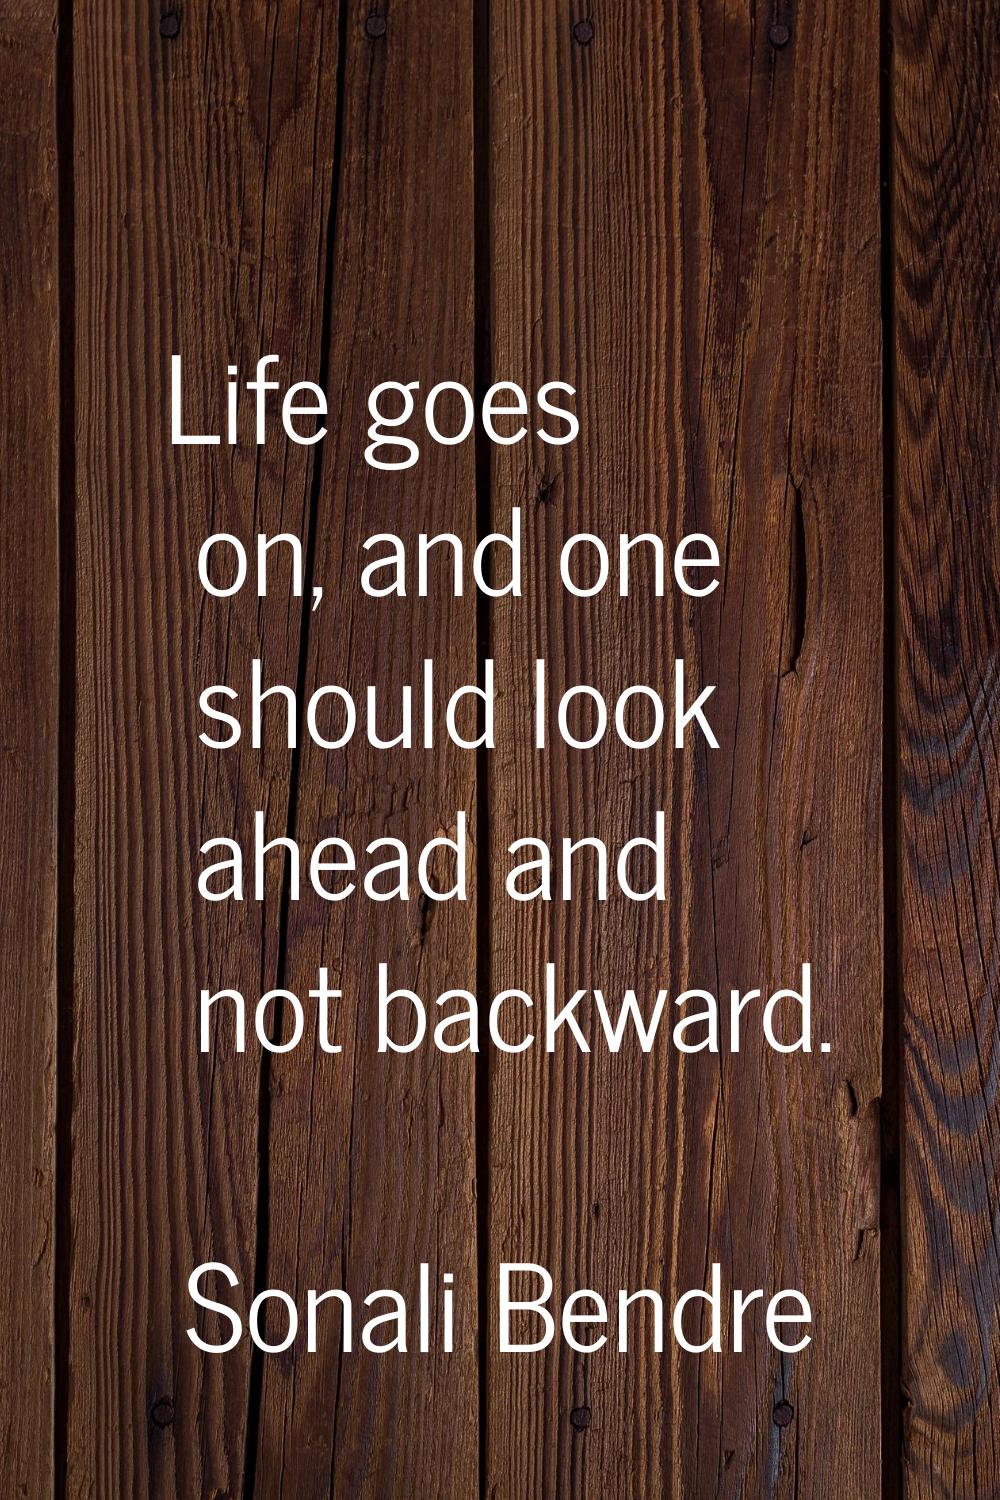 Life goes on, and one should look ahead and not backward.